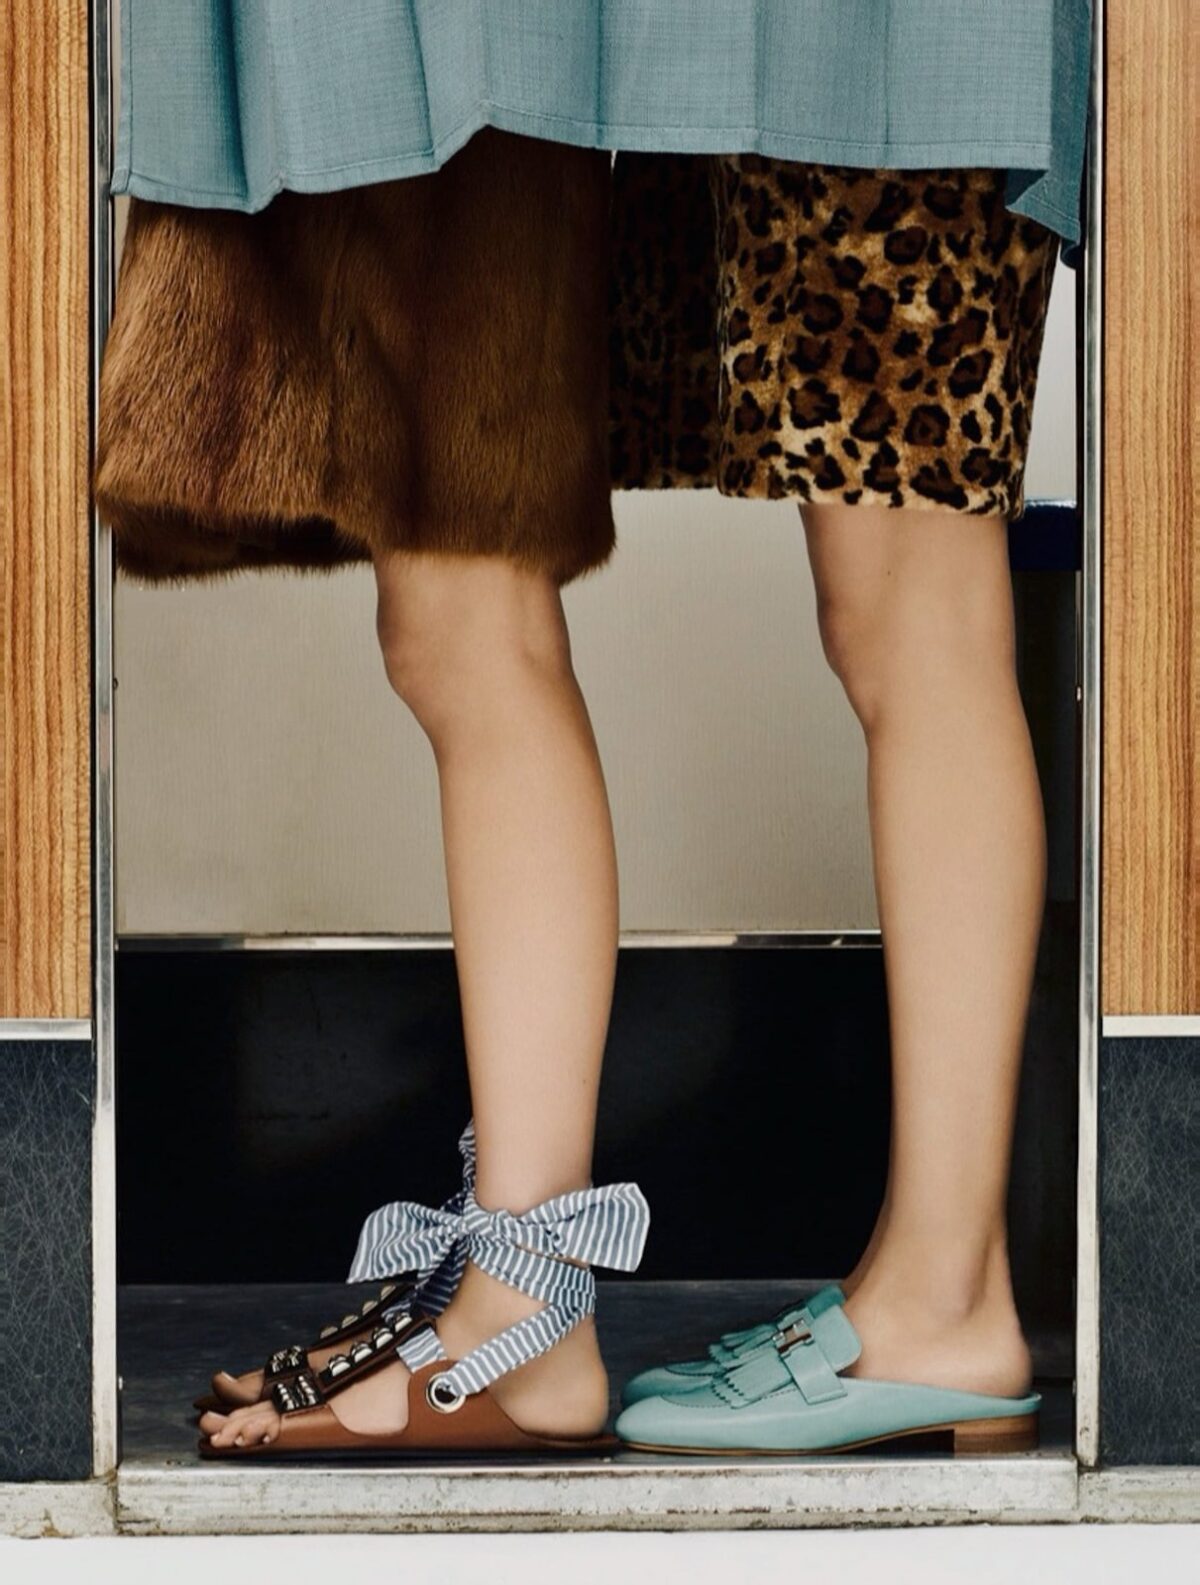 women standing in a Photo Booth wearing sandals and fur coats